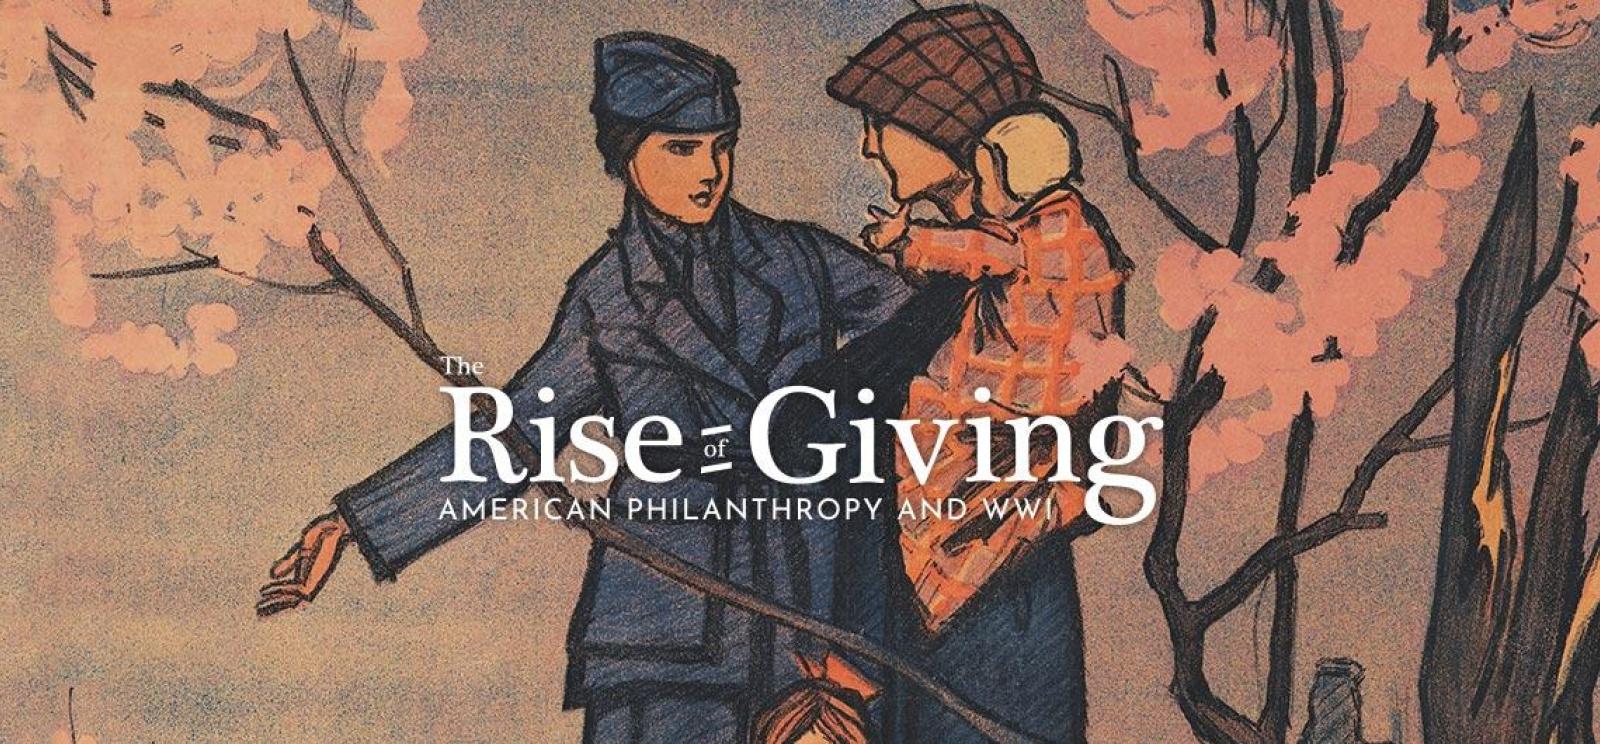 The Rise of Giving